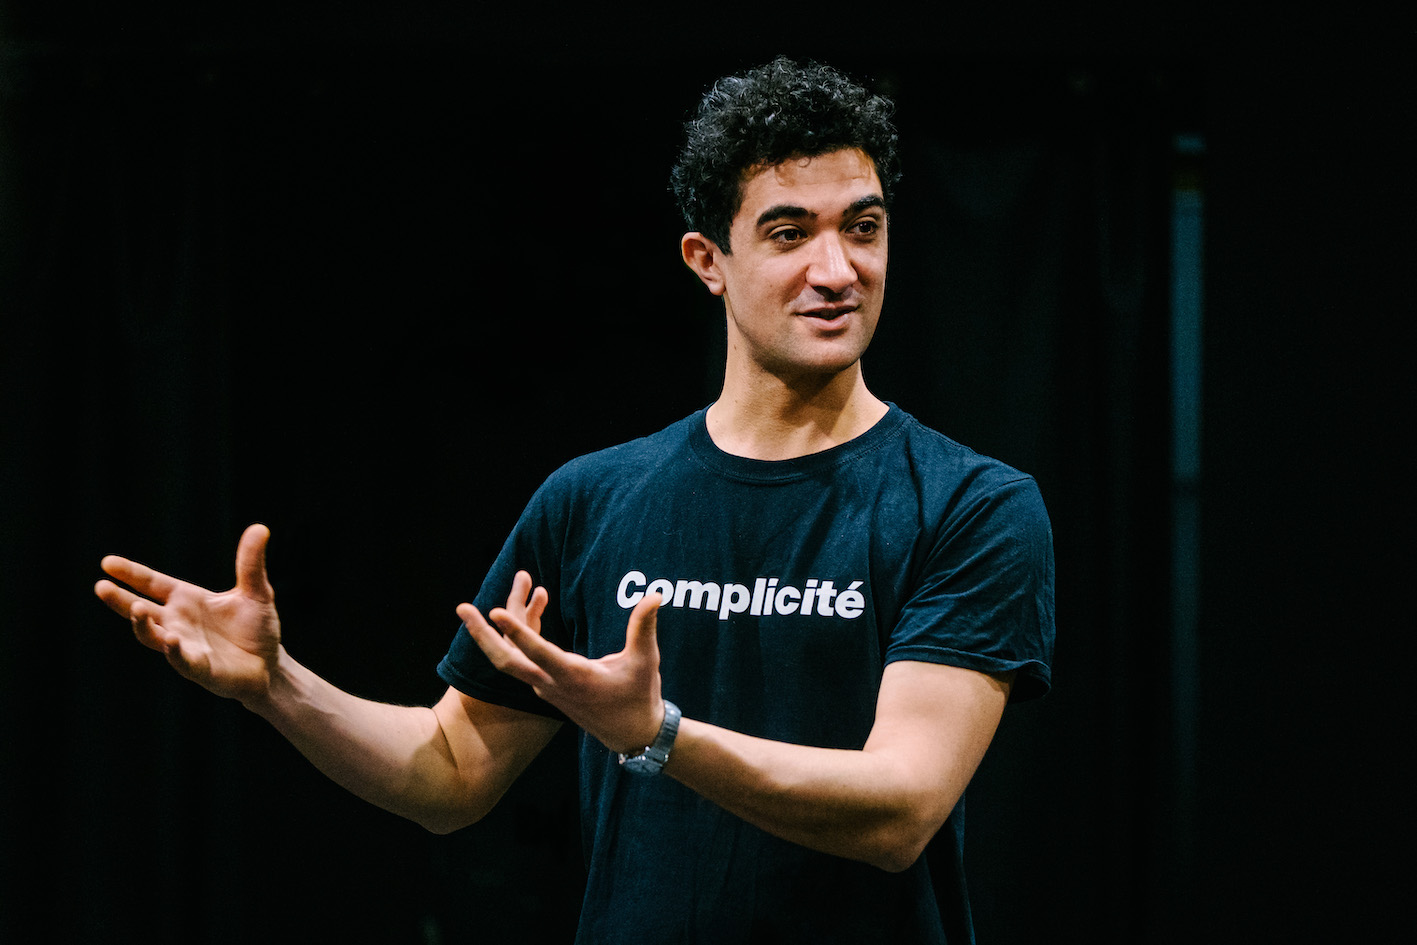 A facilitator speaks calmly, gesturing both arms to the left of the picture, while wearing a Complicté branded tea shirt